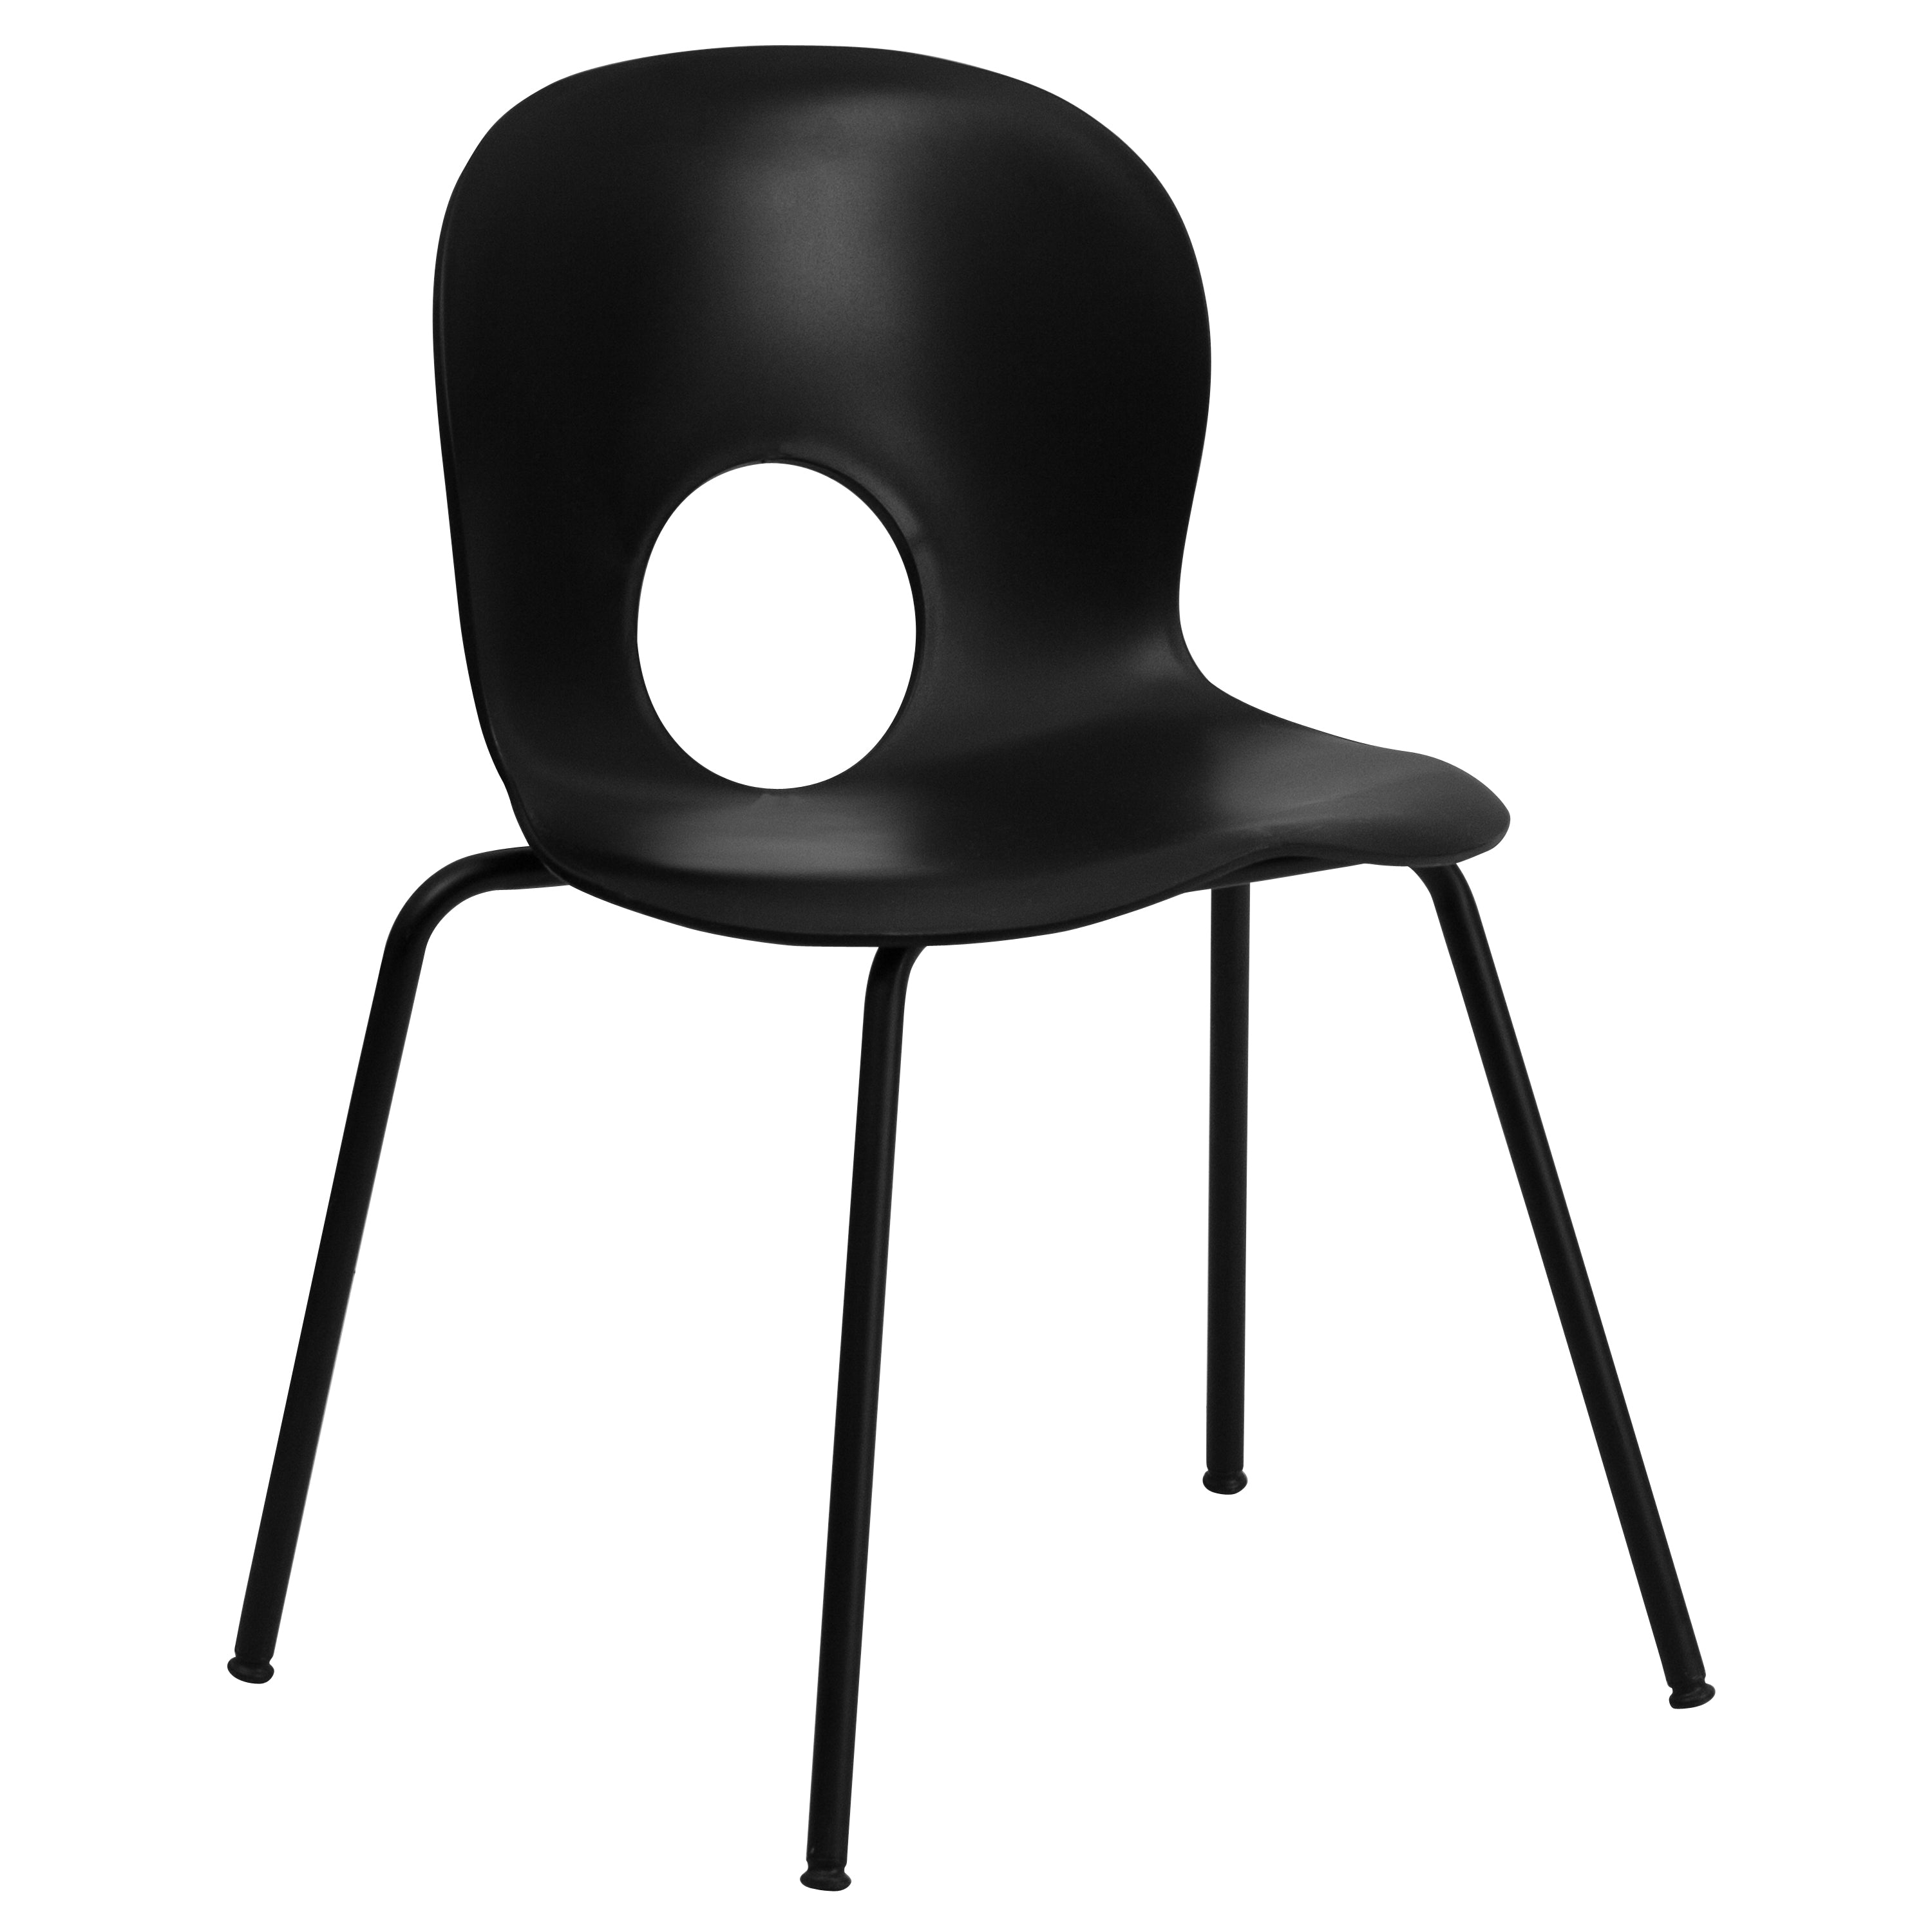 HERCULES Series 770 lb. Capacity Designer Plastic Stack Chair with Black Frame-Plastic Stack Chair-Flash Furniture-Wall2Wall Furnishings